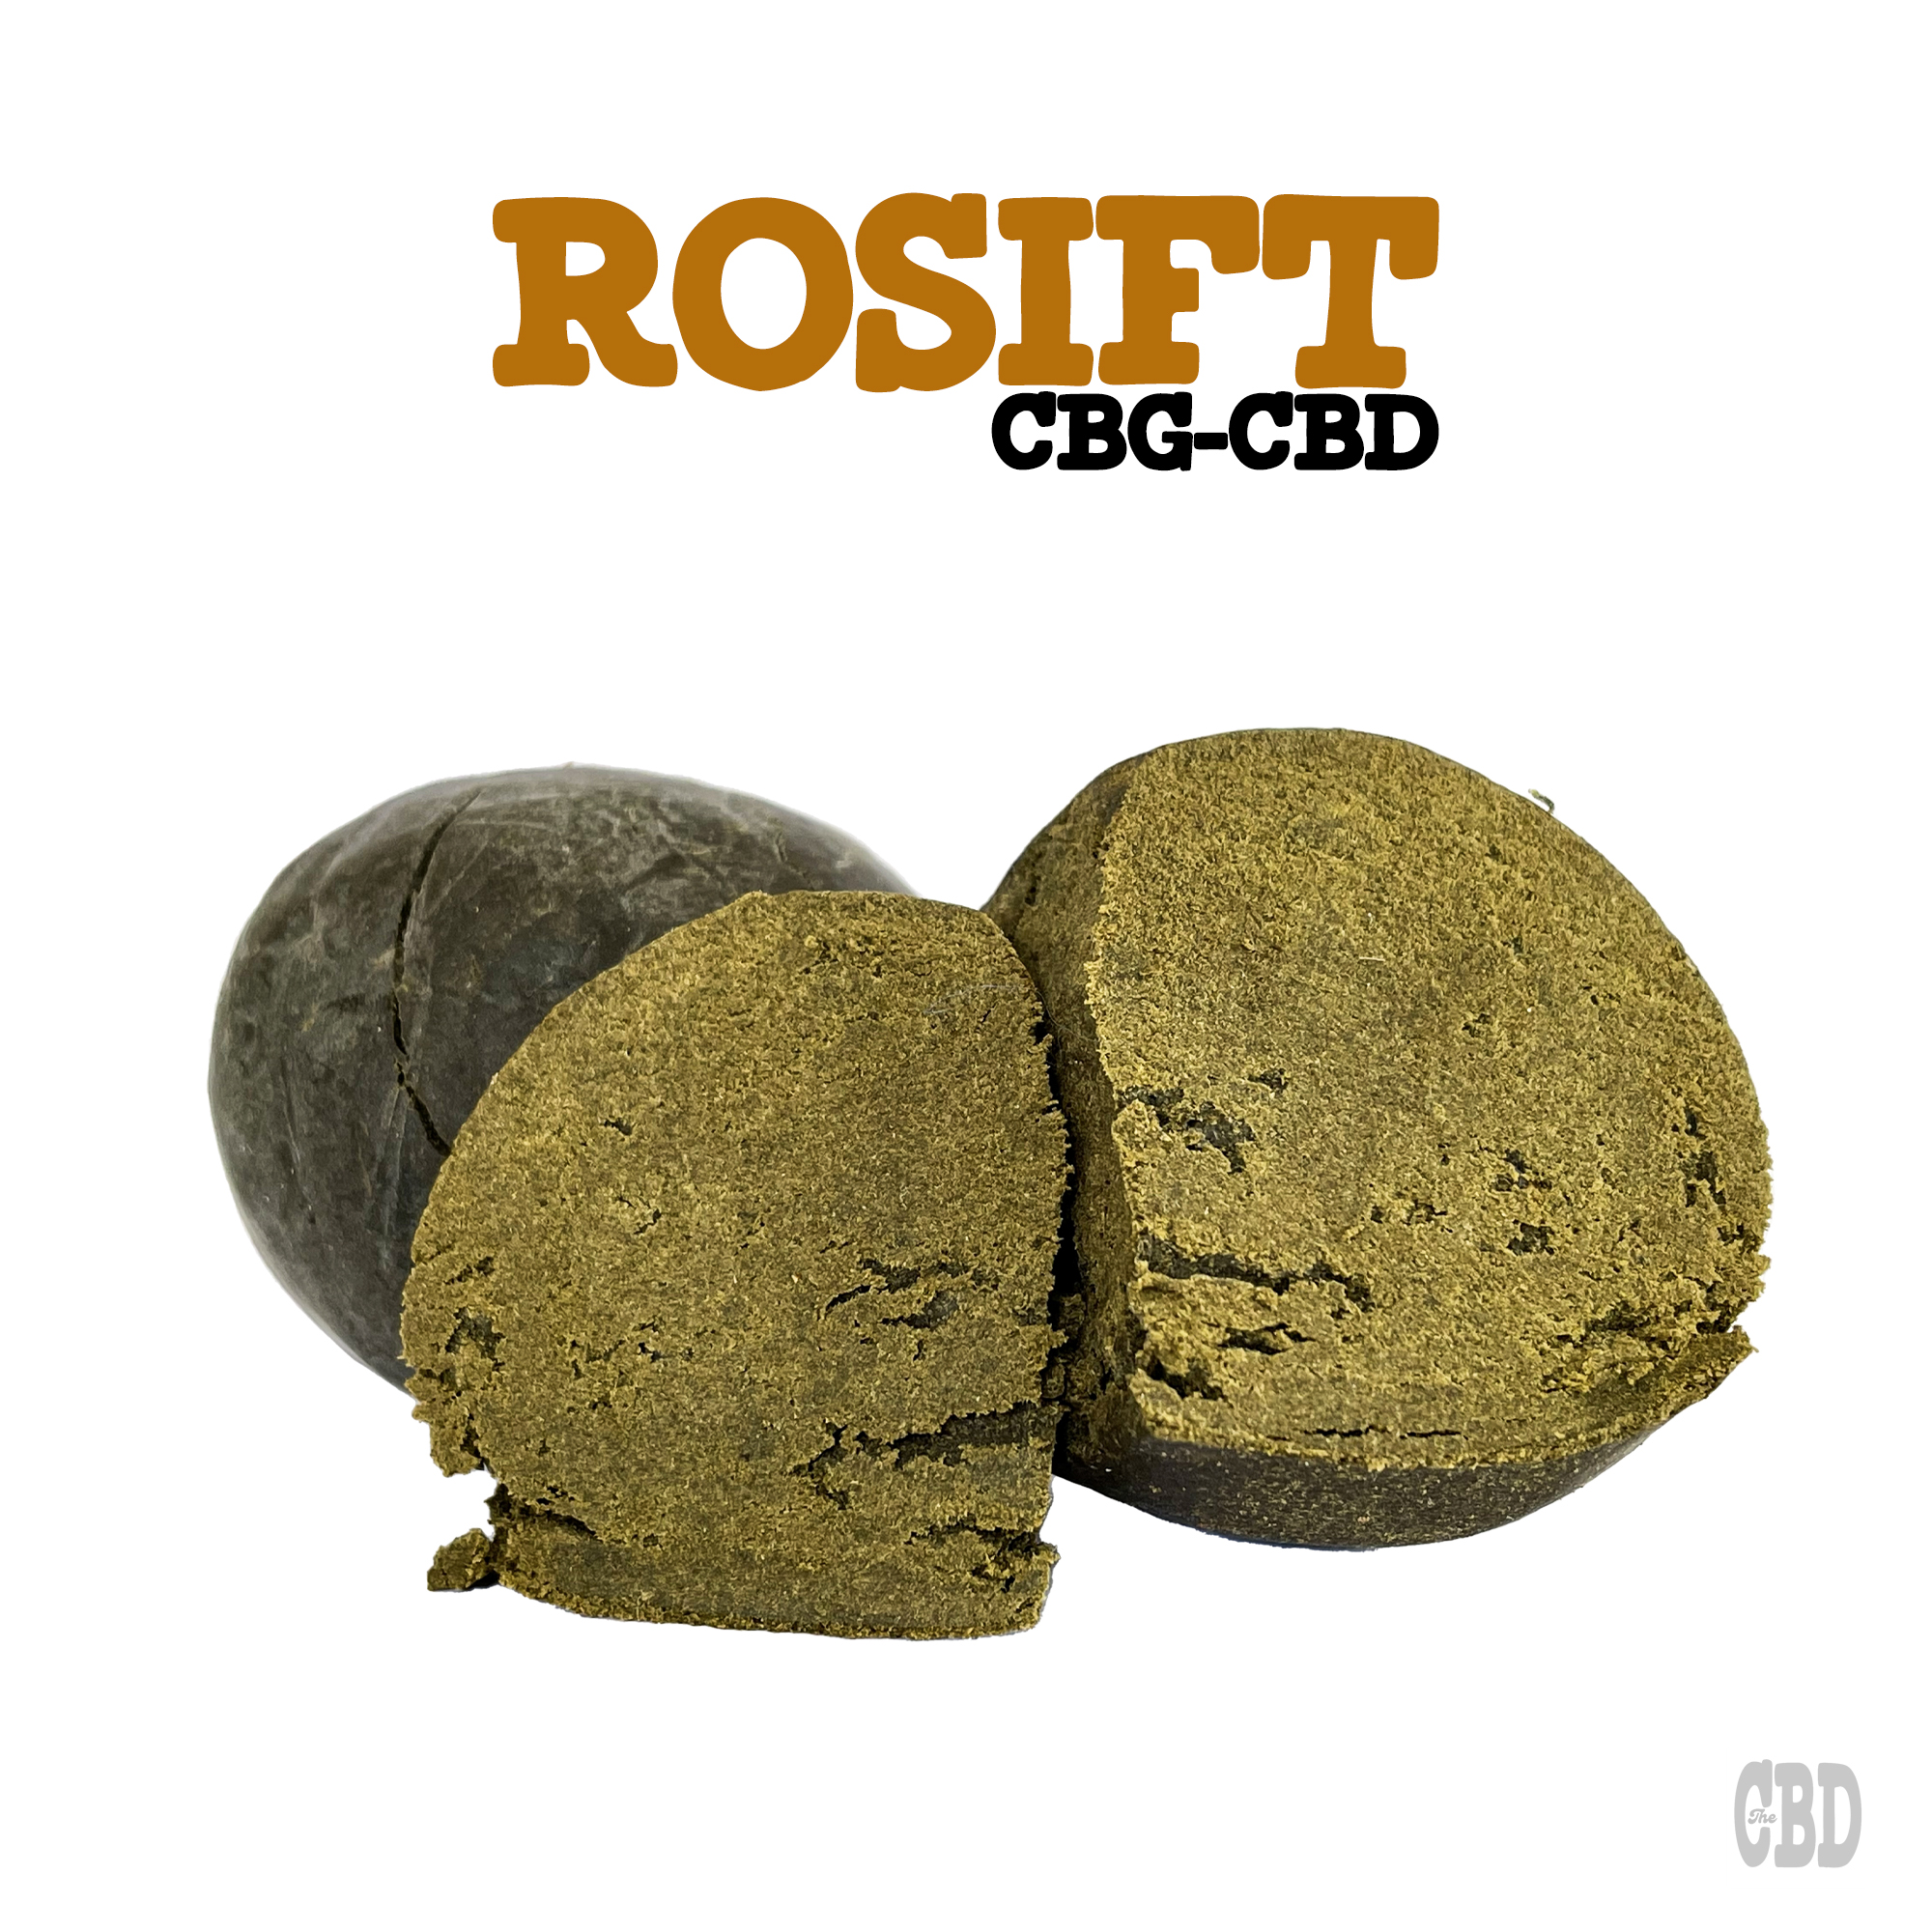 ROSIFT CBD by Thecbdstore